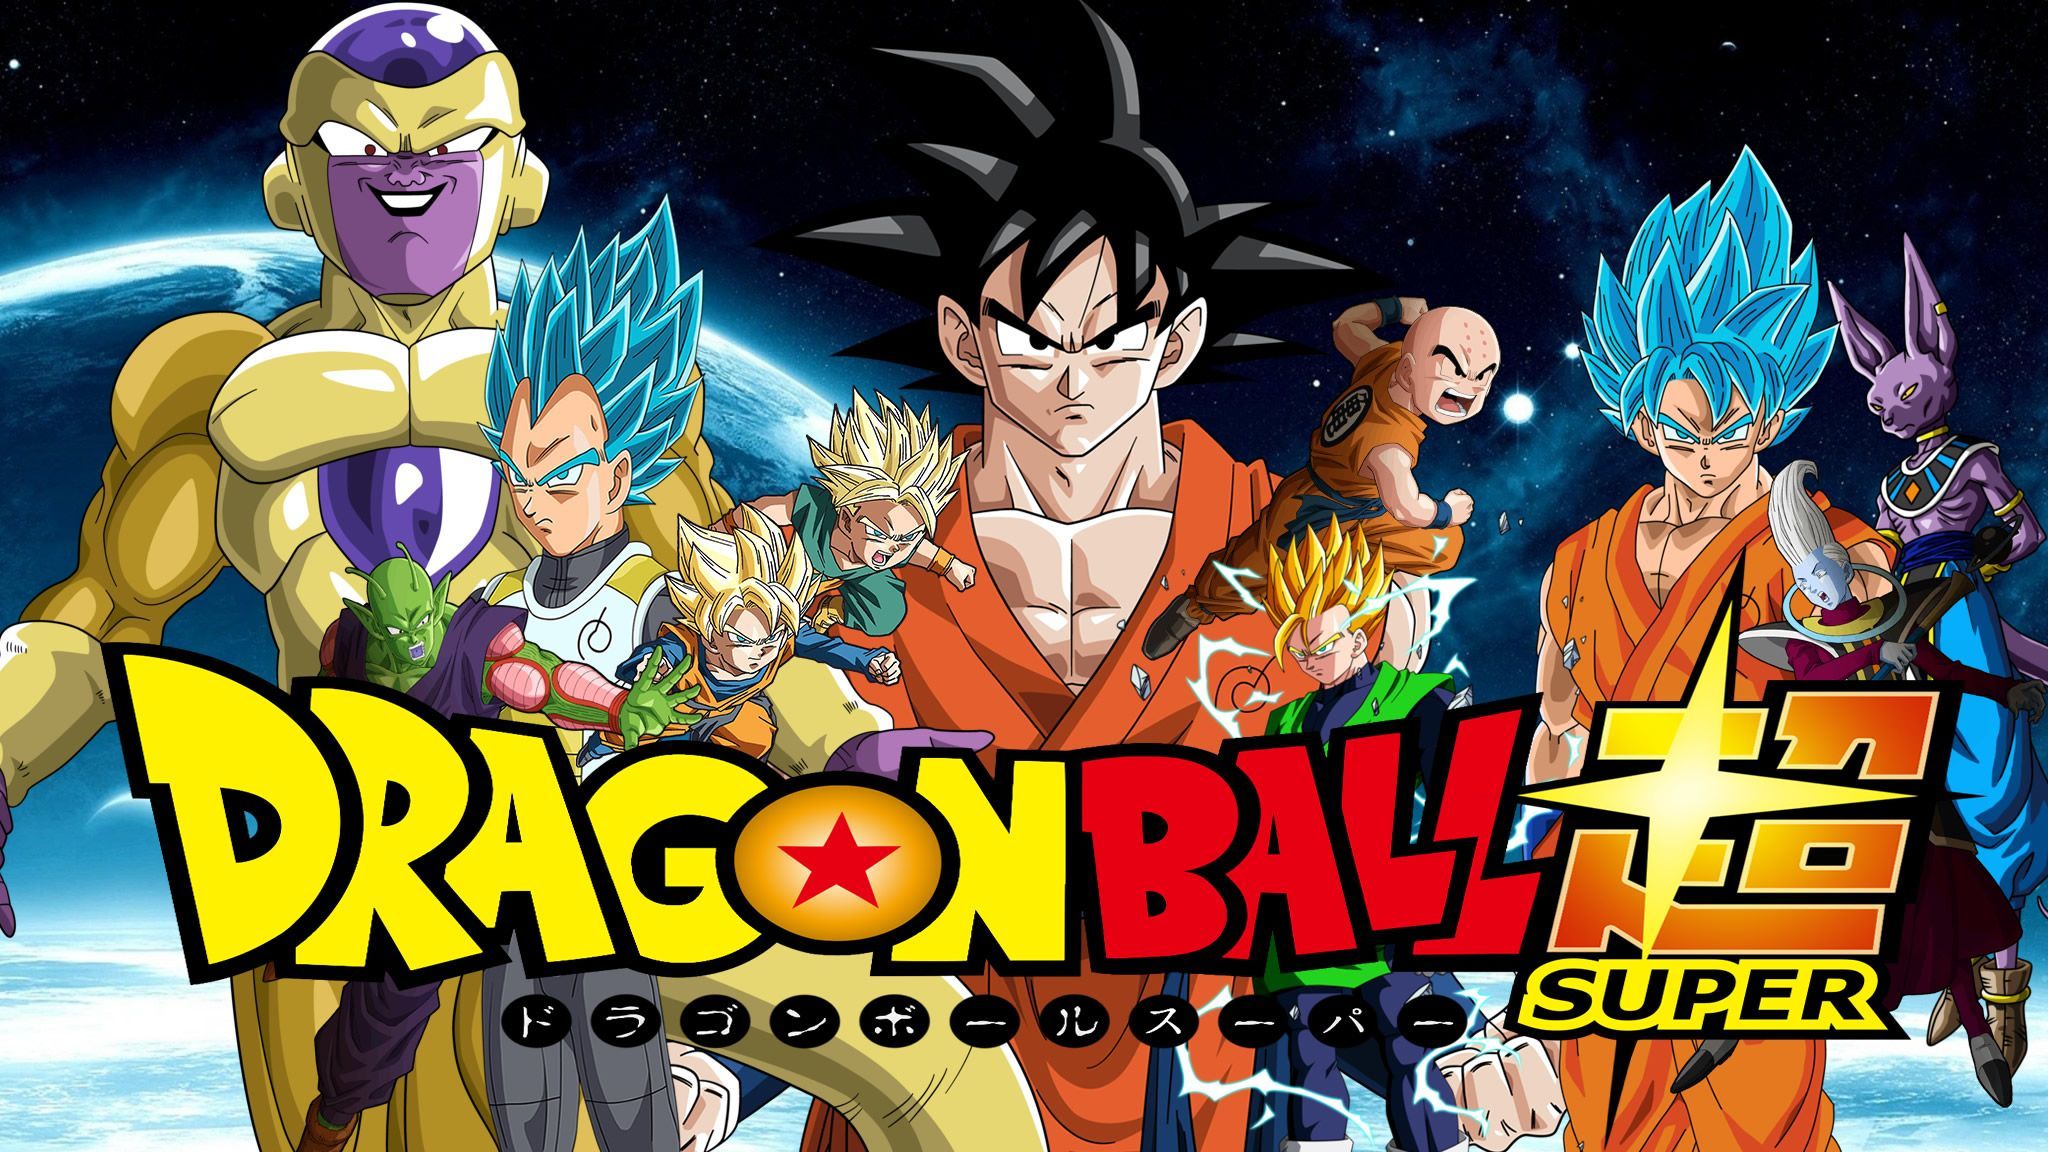 Dragon Ball Super HD Wallpaper and Background Image. Dragon ball super wallpaper, Dragon ball super goku, Anime dragon ball super